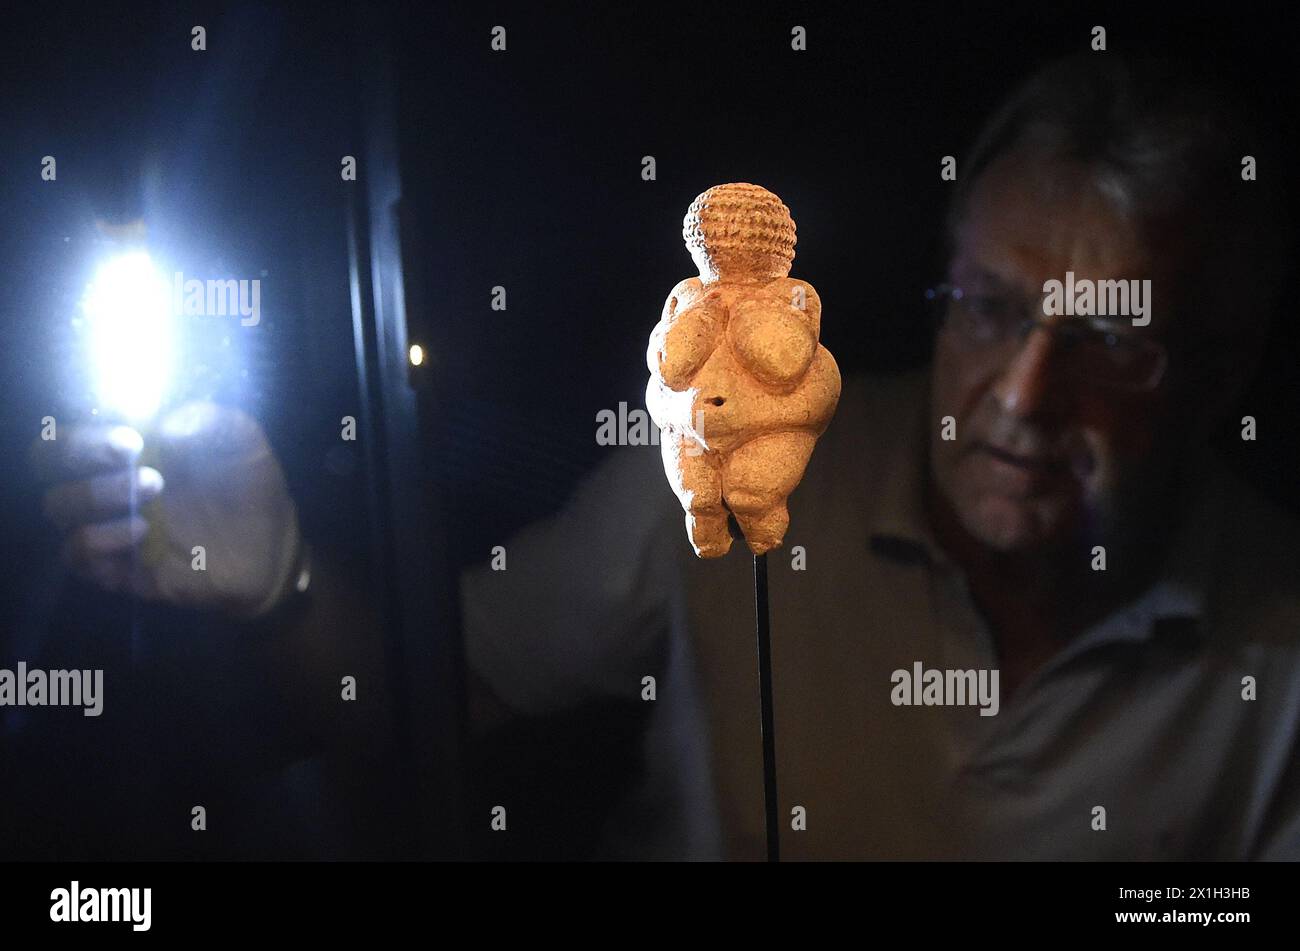 Vienna - ' The Venus of Willendorf ' (also known as  Woman of Willendorf) has a new home, the new ' Venuskabinett ' at Vienna's natural history museum. The Venus of Willendorf, a small Paleolithic statuette with a fleshy, distinctively feminine figure, was discovered 100 years ago. The statuette is 29500 years old.  PICTURE: taken on 22nd September 2015 during relocation.  Venus of Willendorf - 20150922 PD0855 - Rechteinfo: Rights Managed (RM) Stock Photo